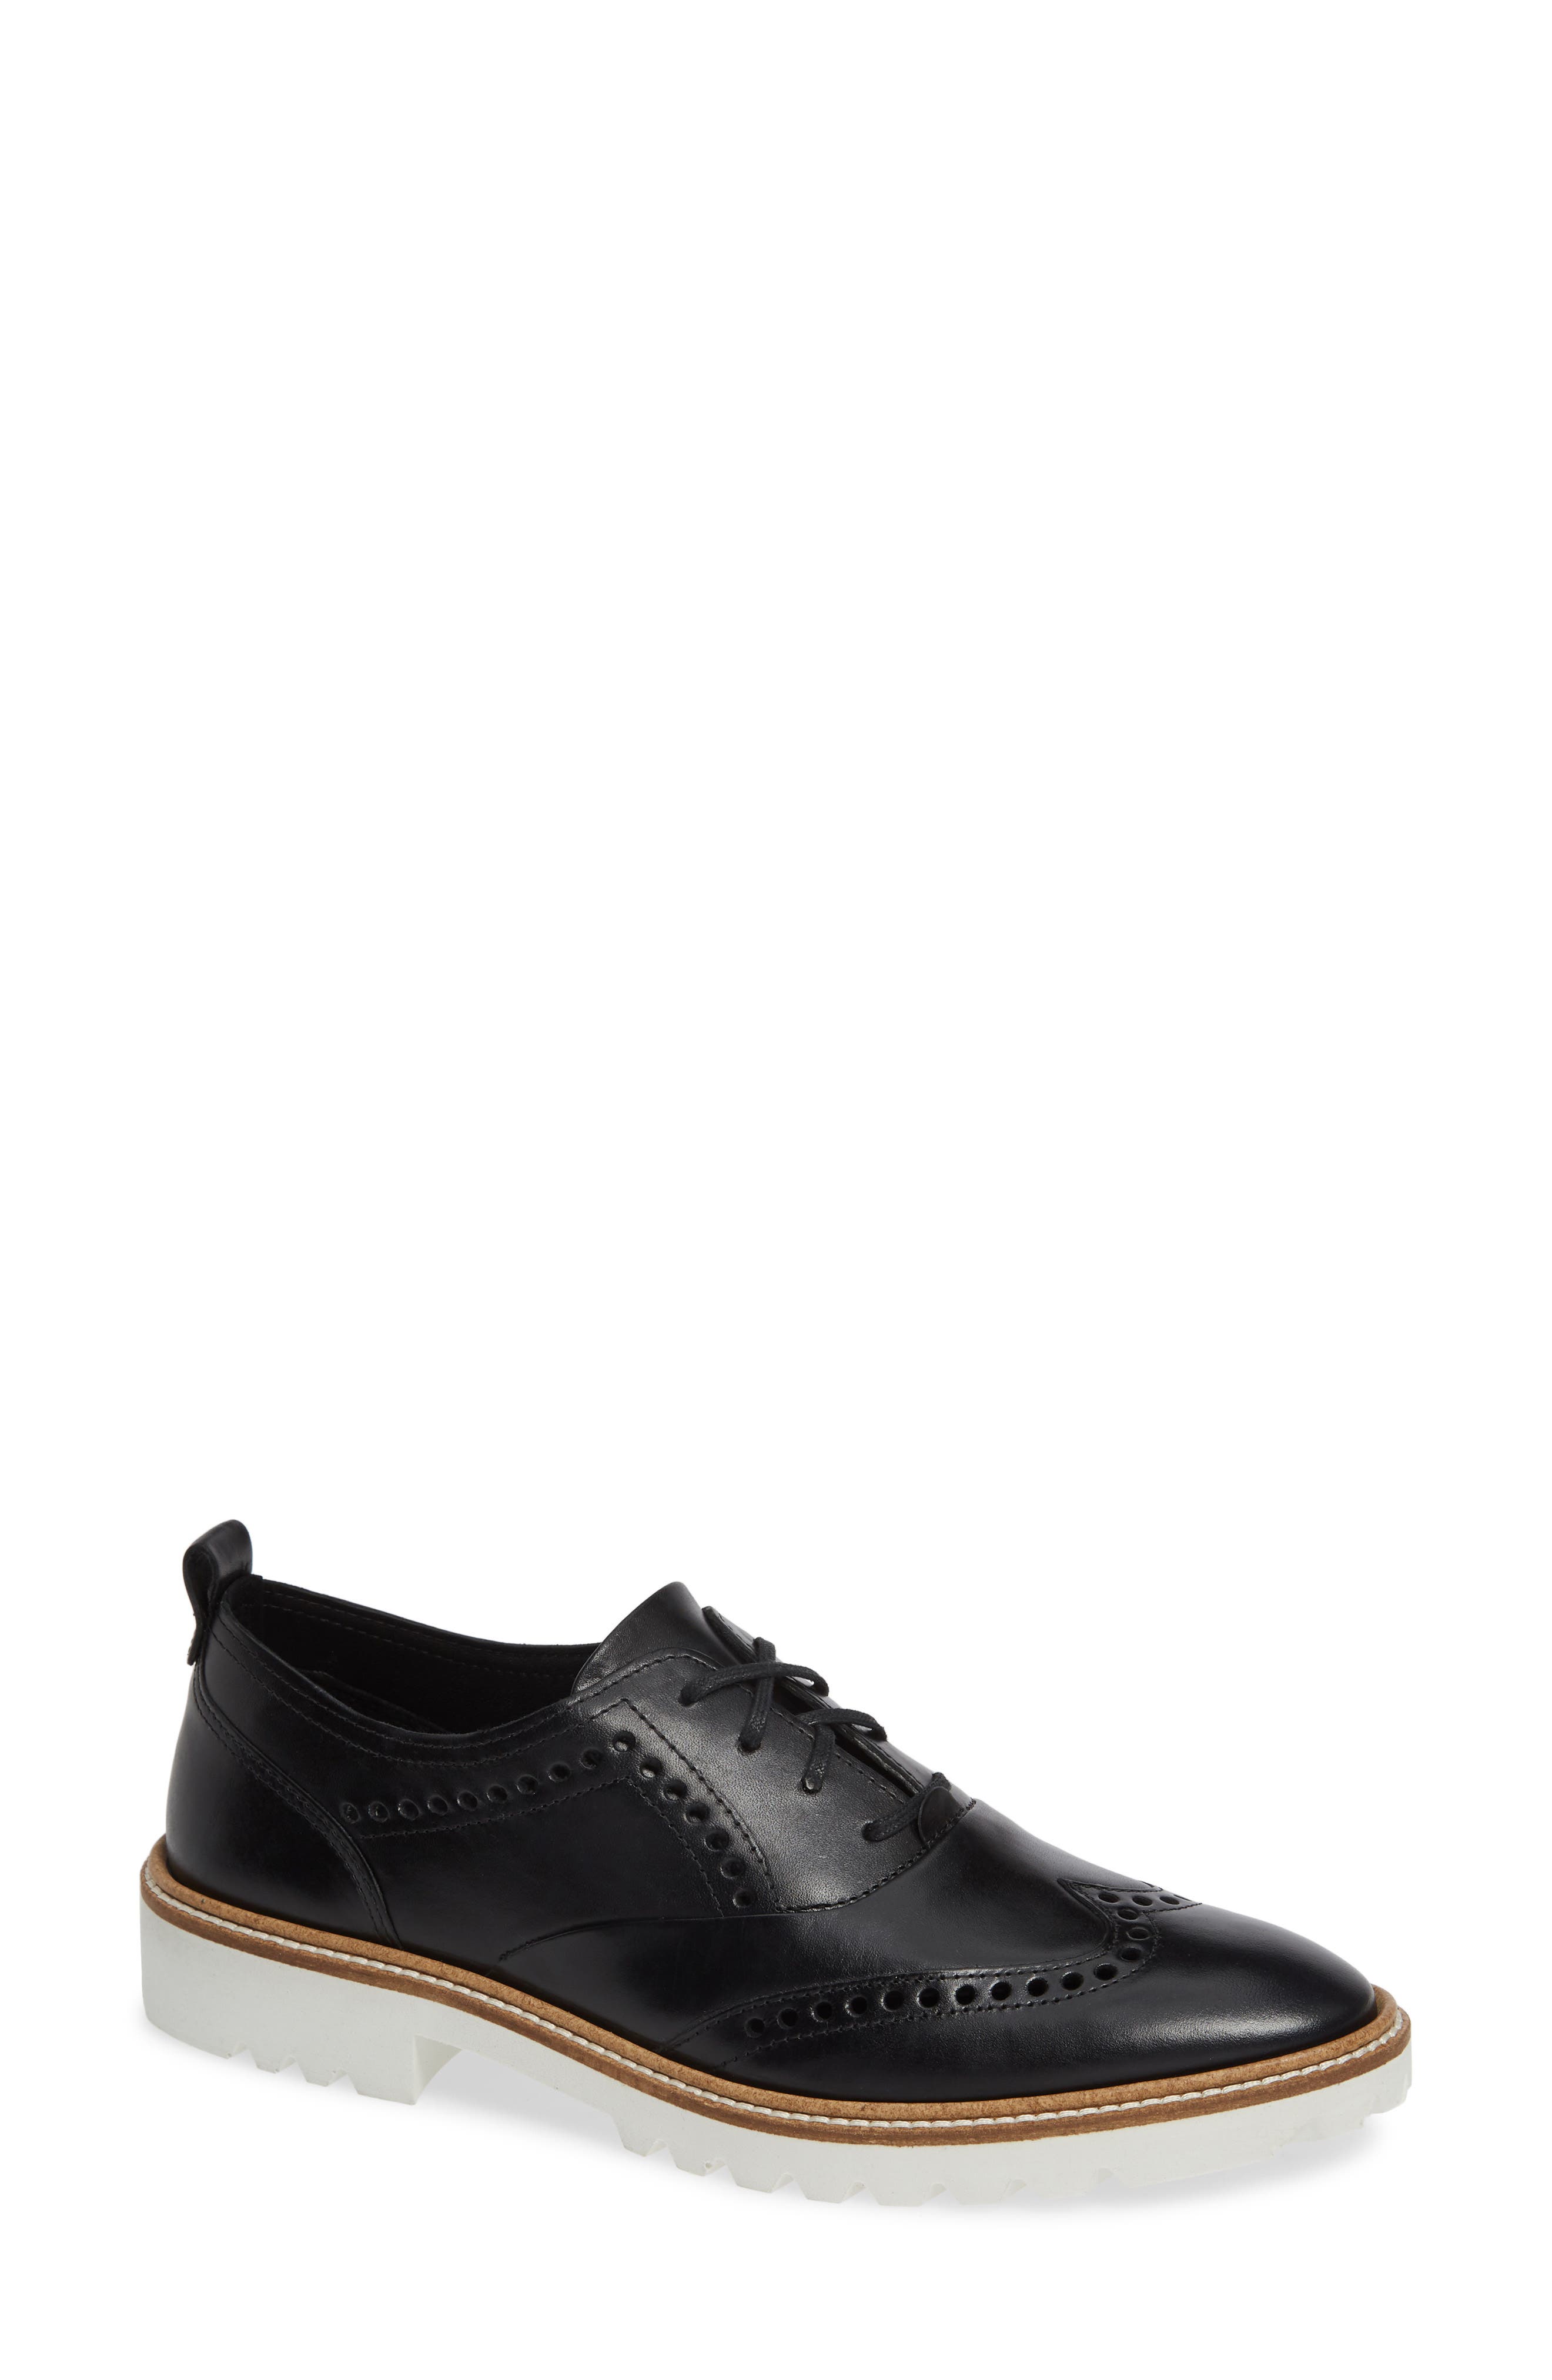 ECCO Incise Tailored Wingtip Oxford 